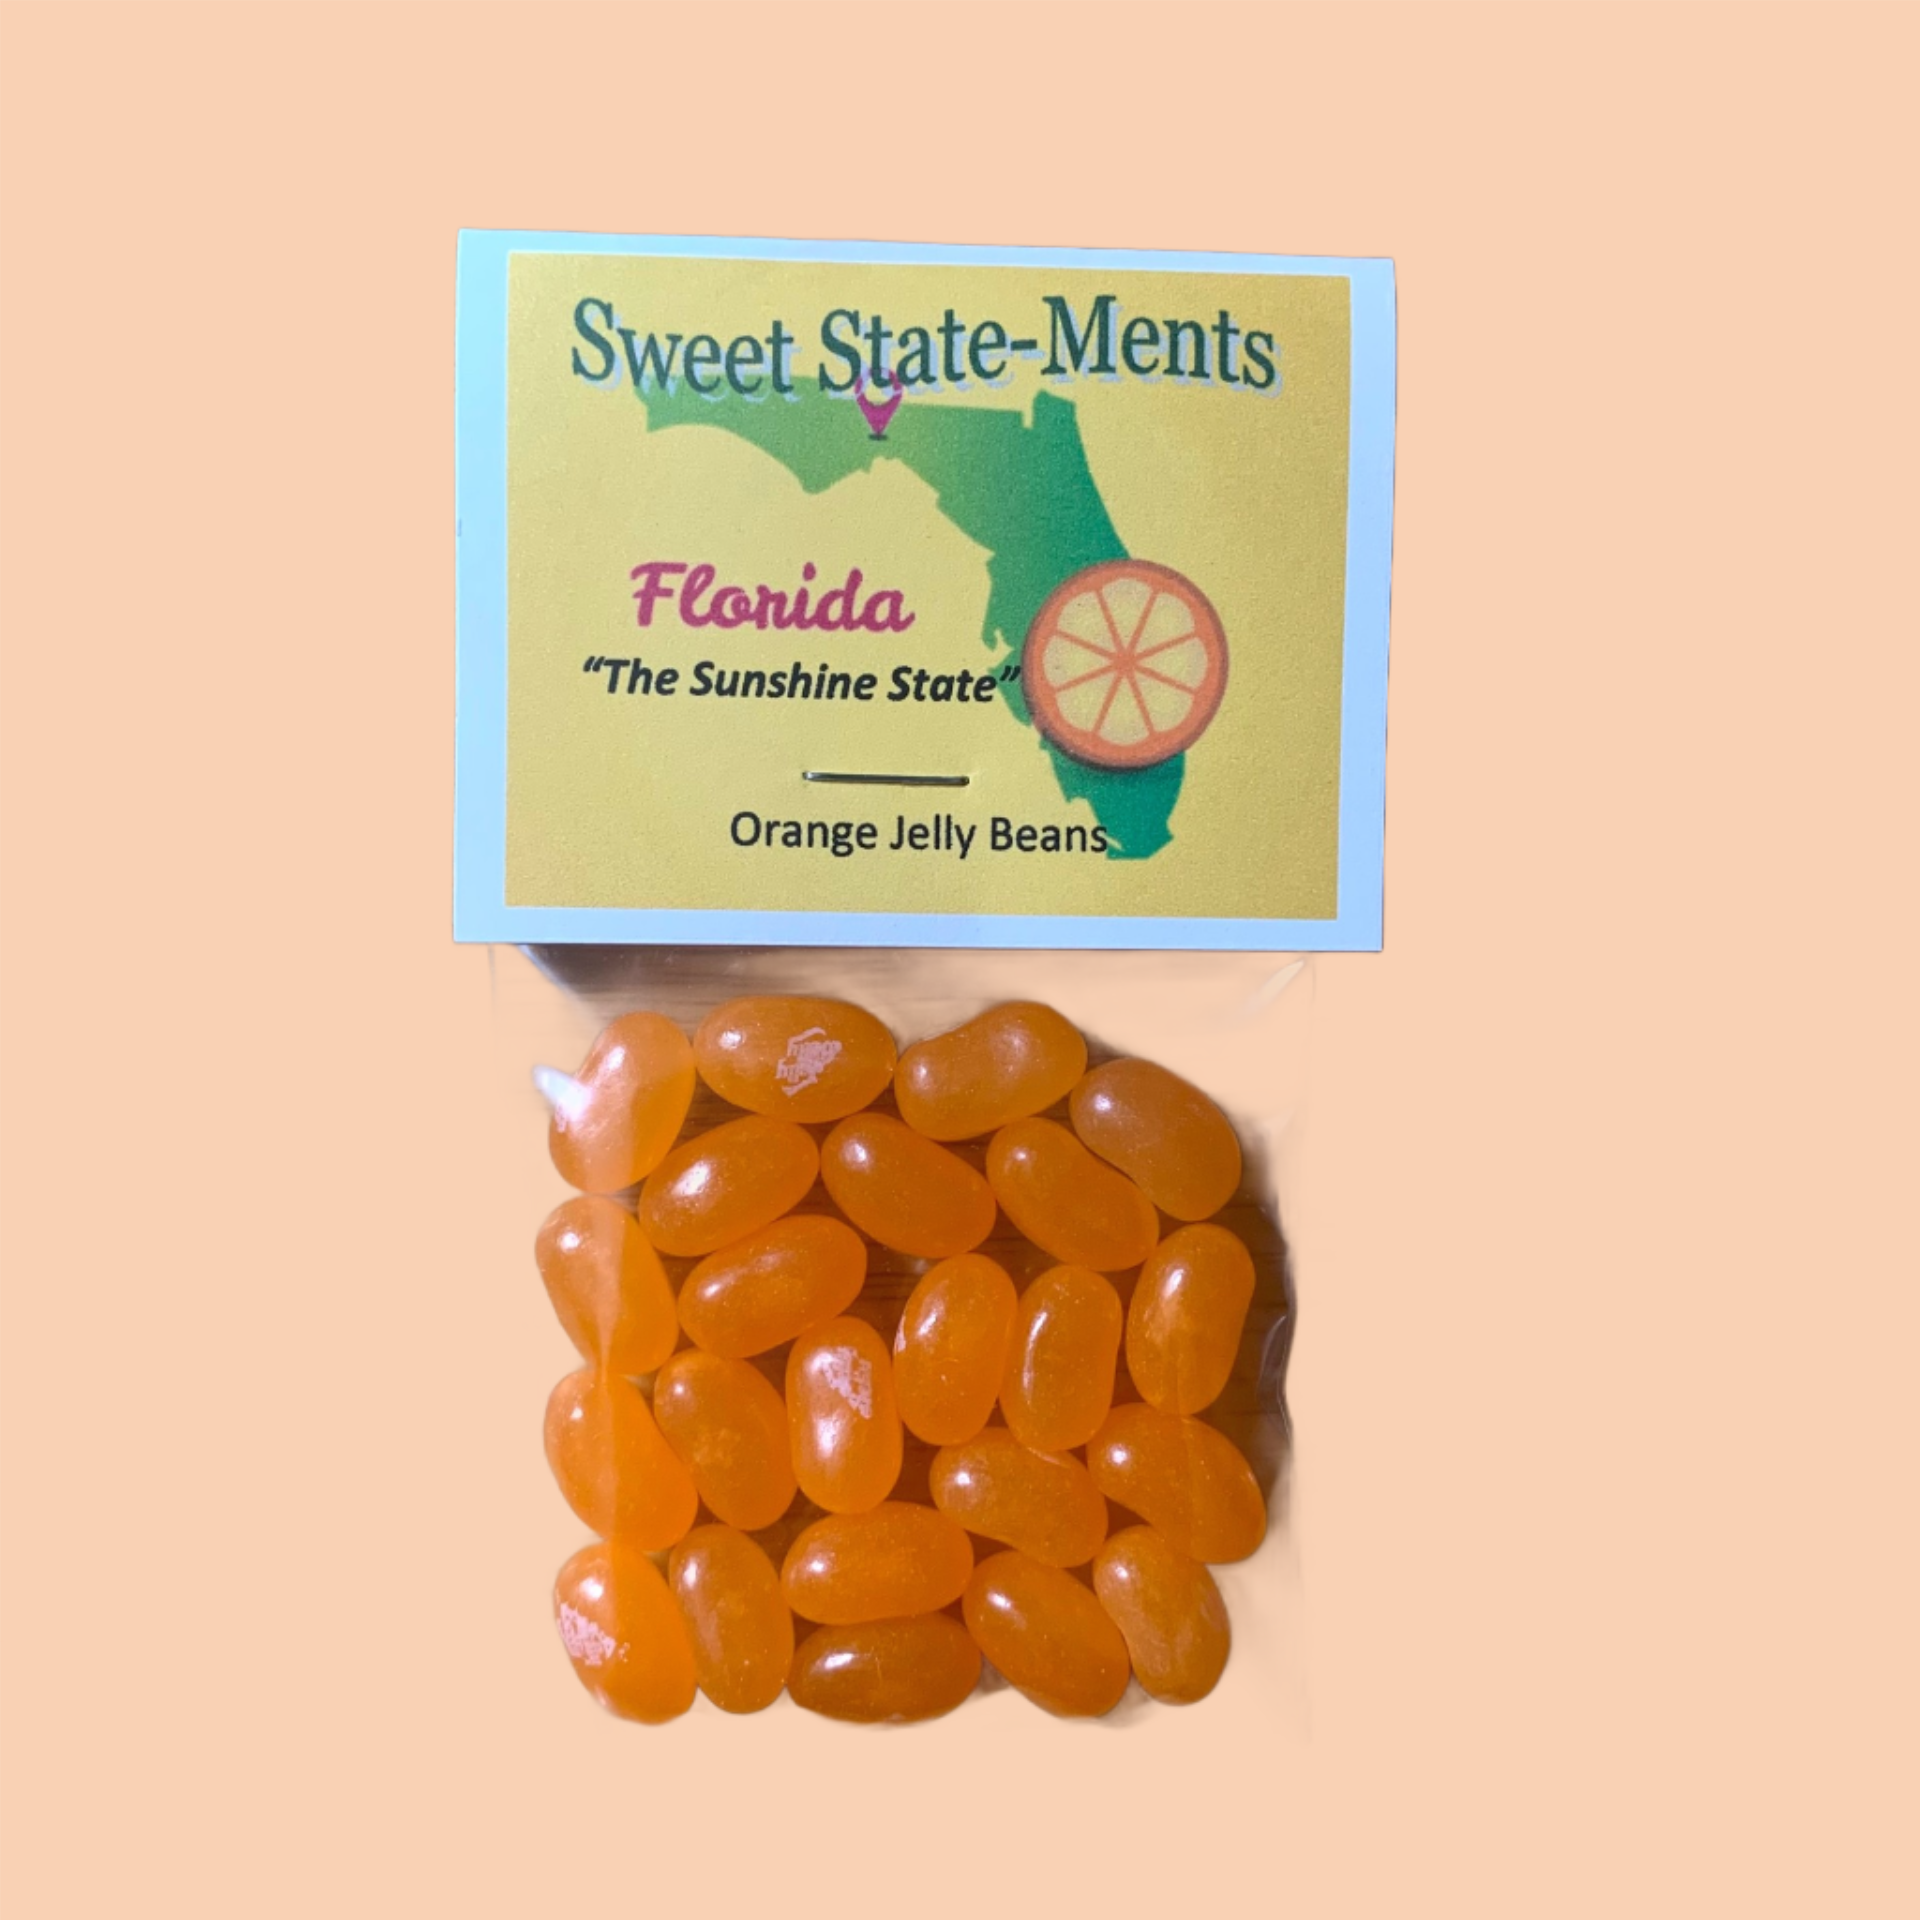 Orange flavored jelly beans for Florida